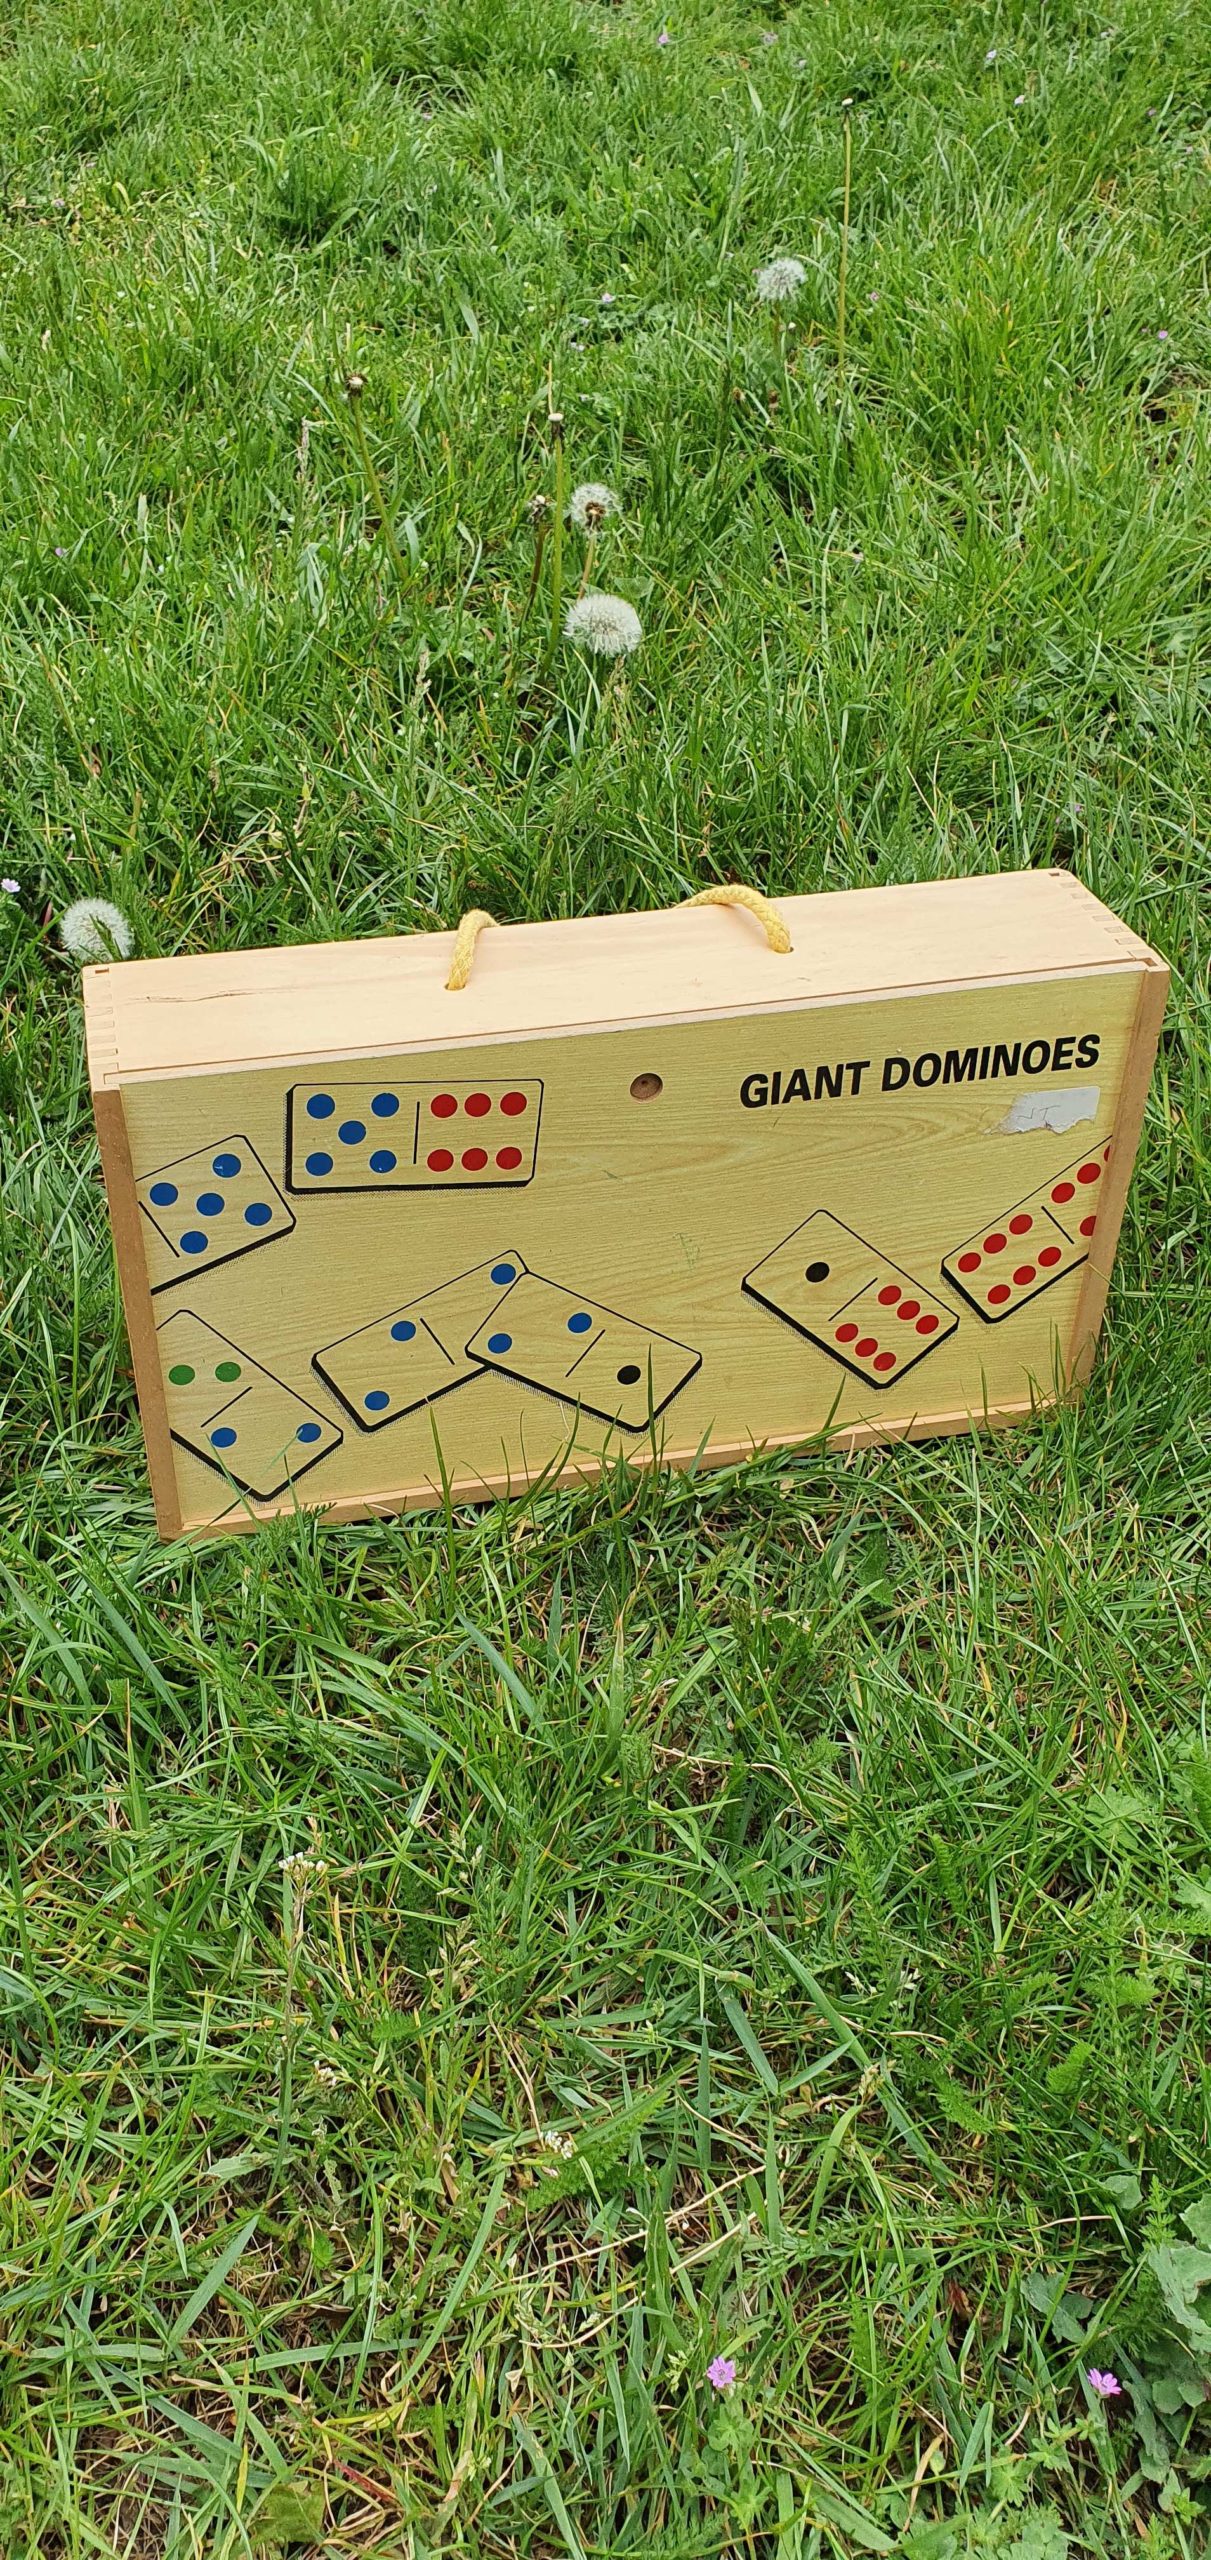 Dominoes scaled